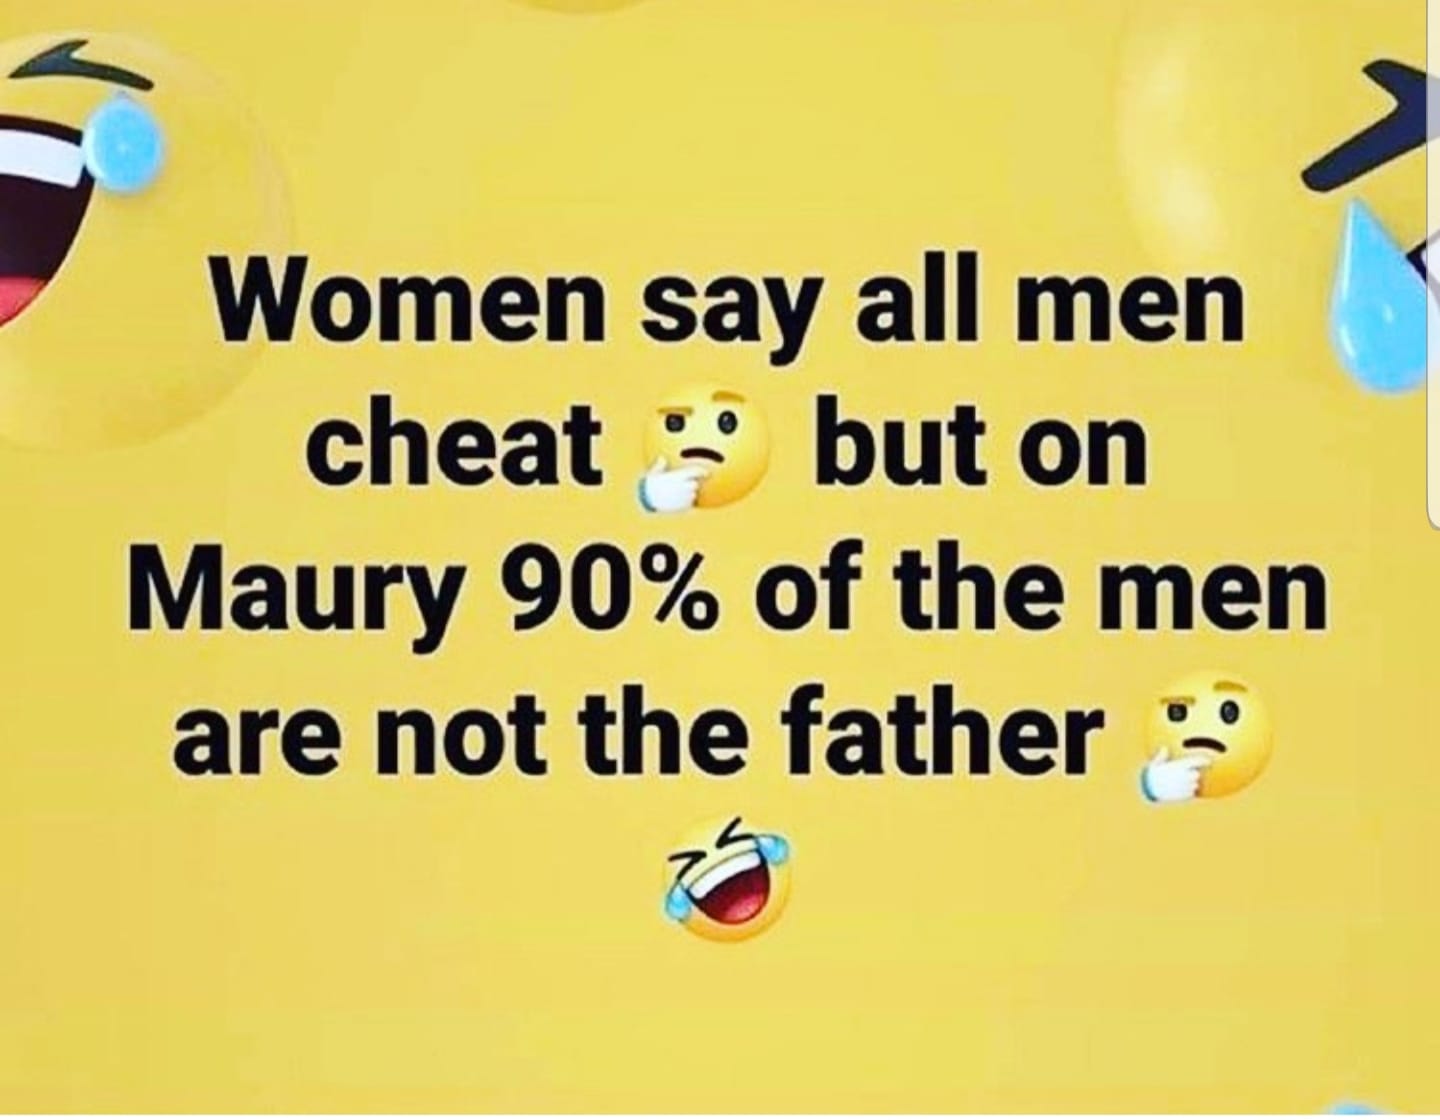 material - Women say all men cheat but on Maury 90% of the men are not the father